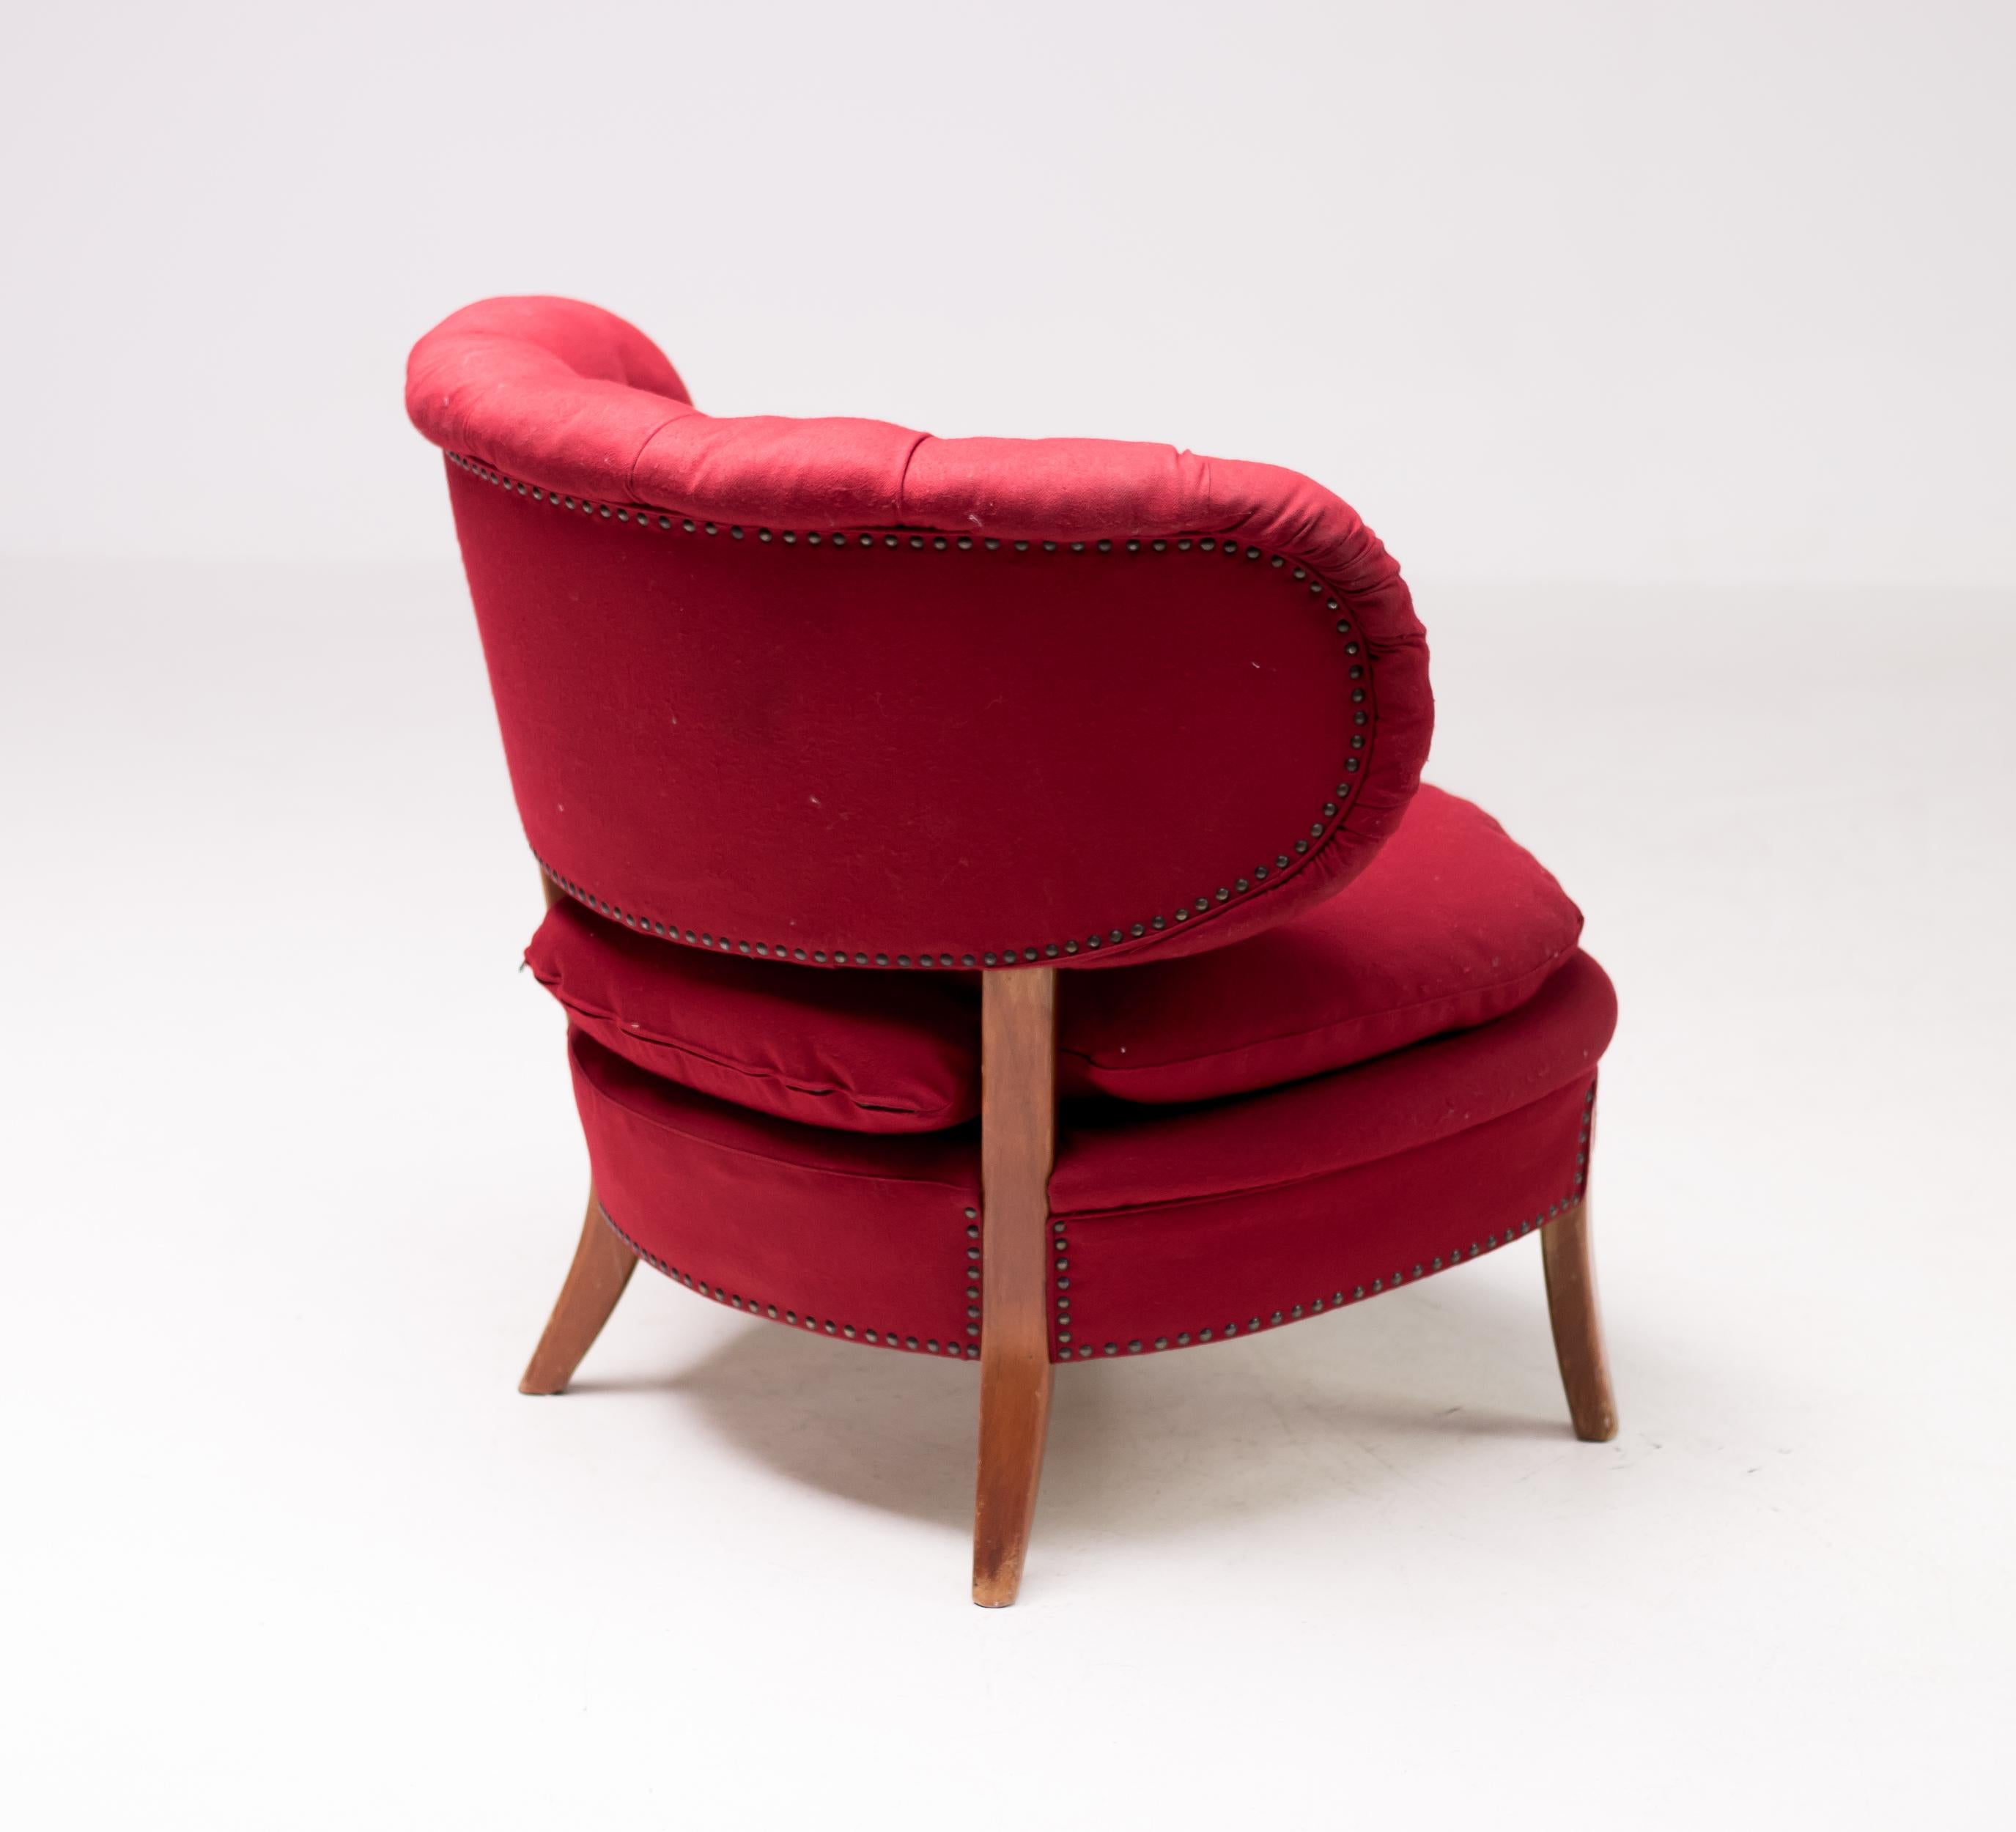 Beautiful Swedish tufted slipper chair designed by Otto Schulz for Boet, Sweden.
Original red velvet upholstery in nice vintage condition.
The chair is detailed with brass nails.